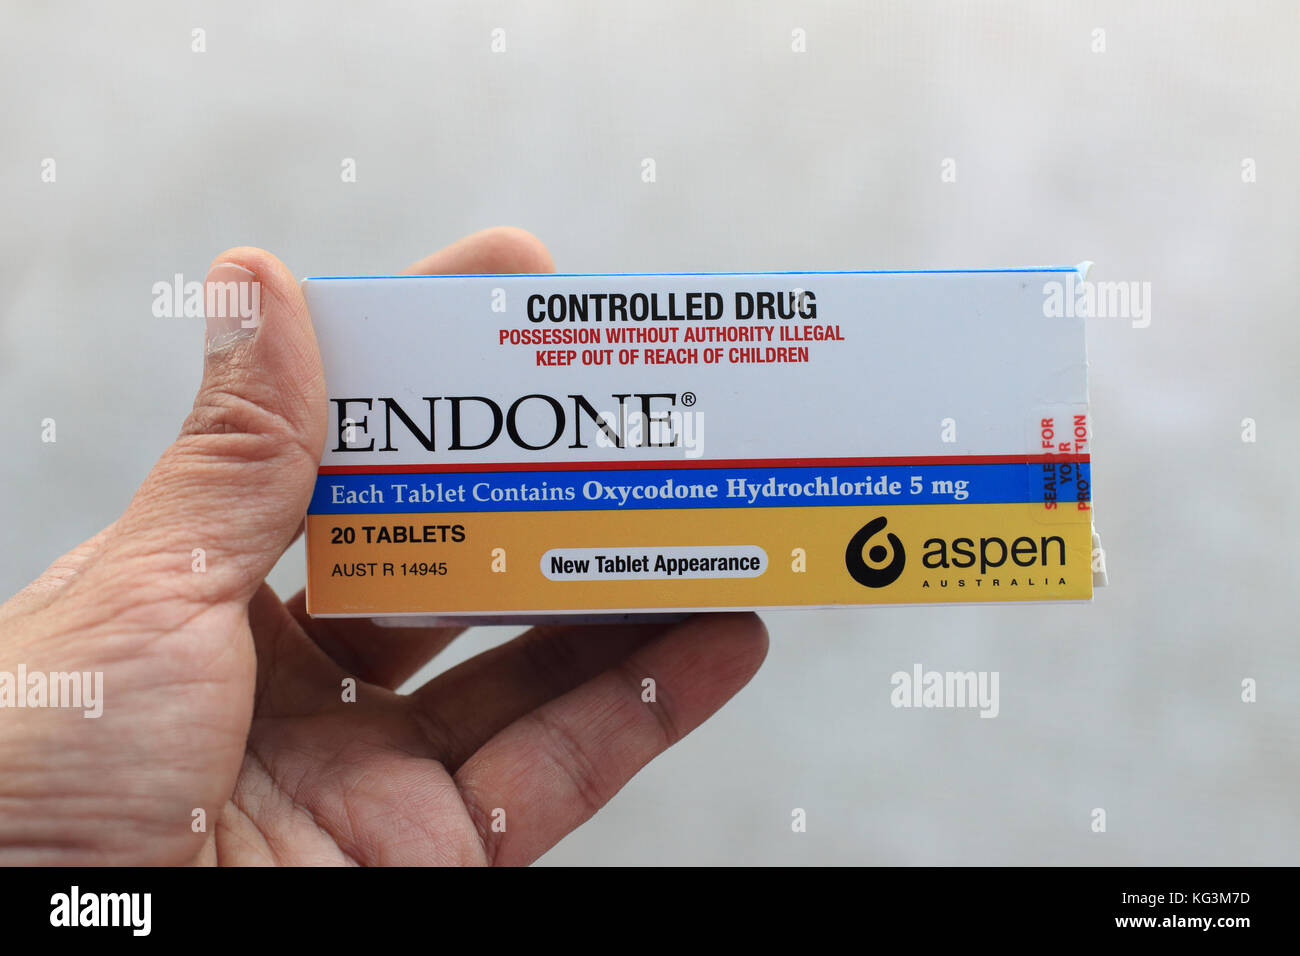 NOT AN ACTUAL MEDICATION - STOCK PHOTO ONLY! Prescription painkiller Endone  - strong pain killer isolated Stock Photo